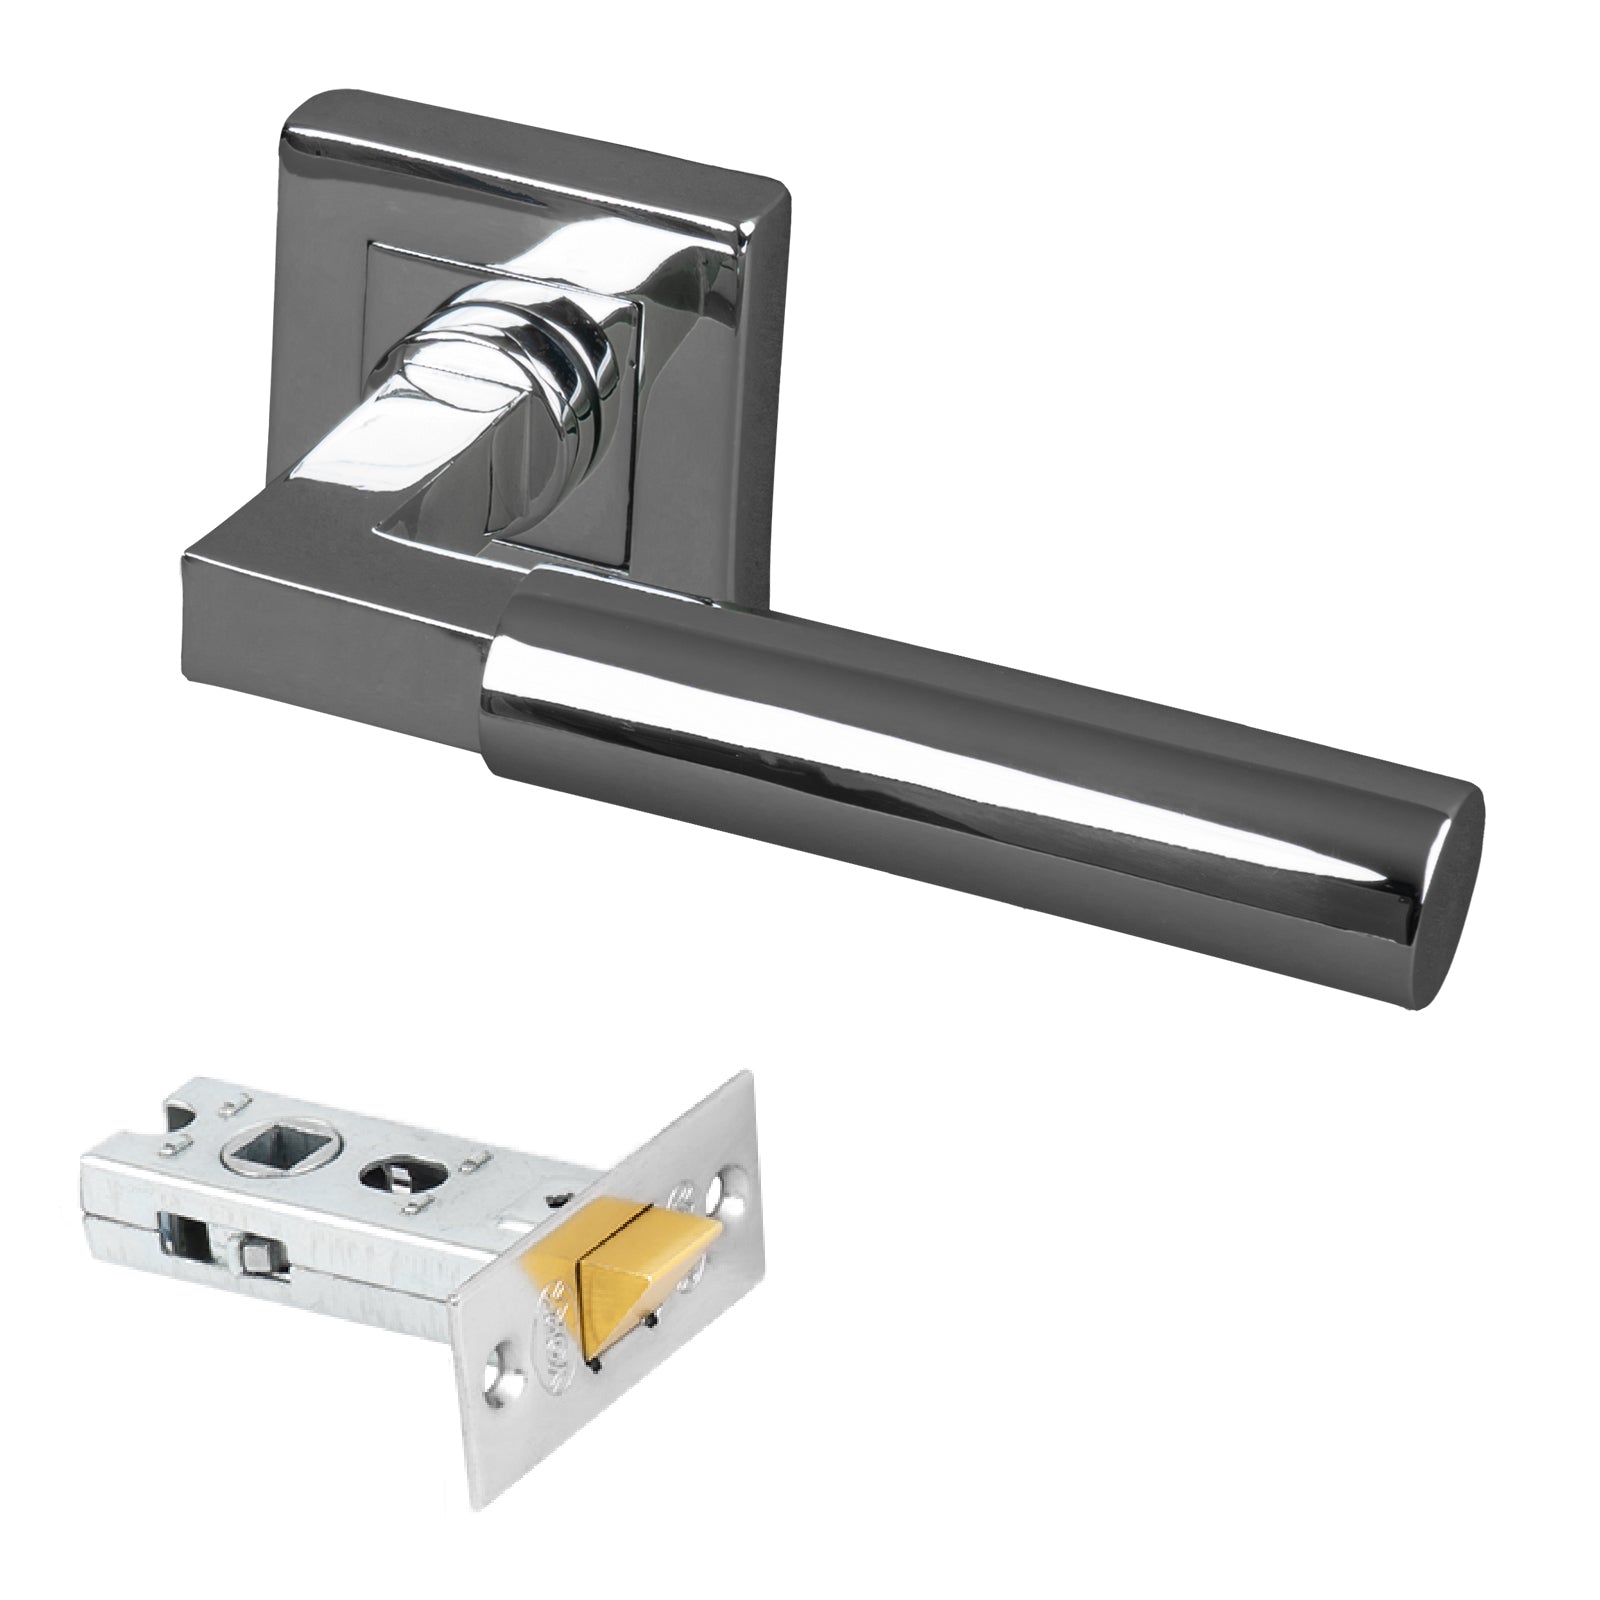 Chrome square rose door handles latch set, 2.5 inch latch and handles